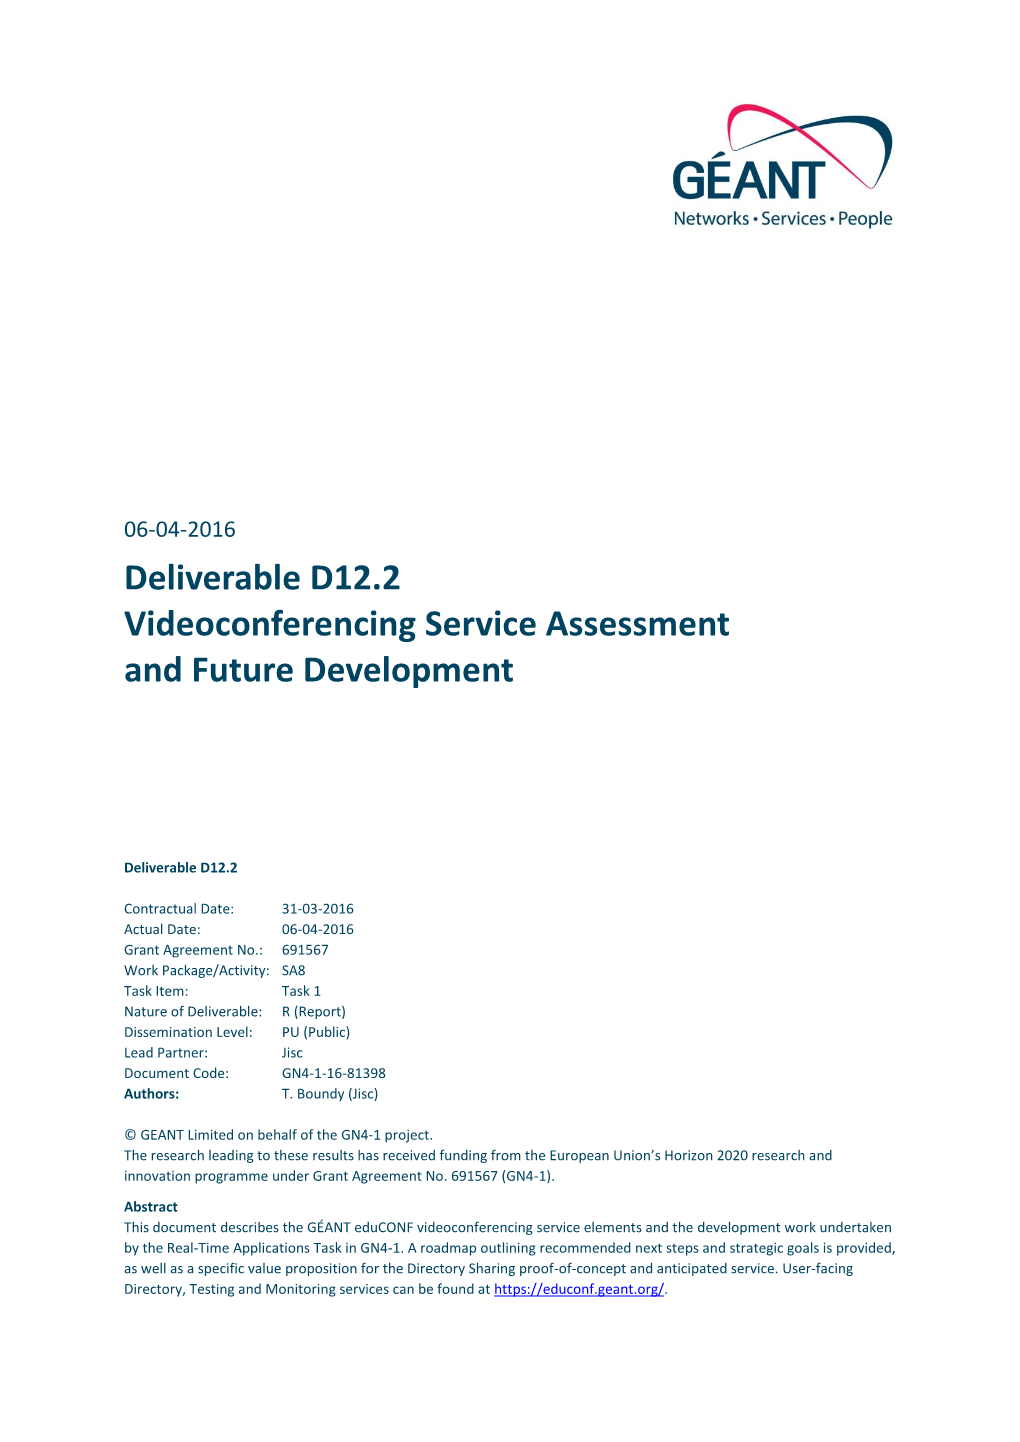 Videoconferencing Service Assessment and Future Development